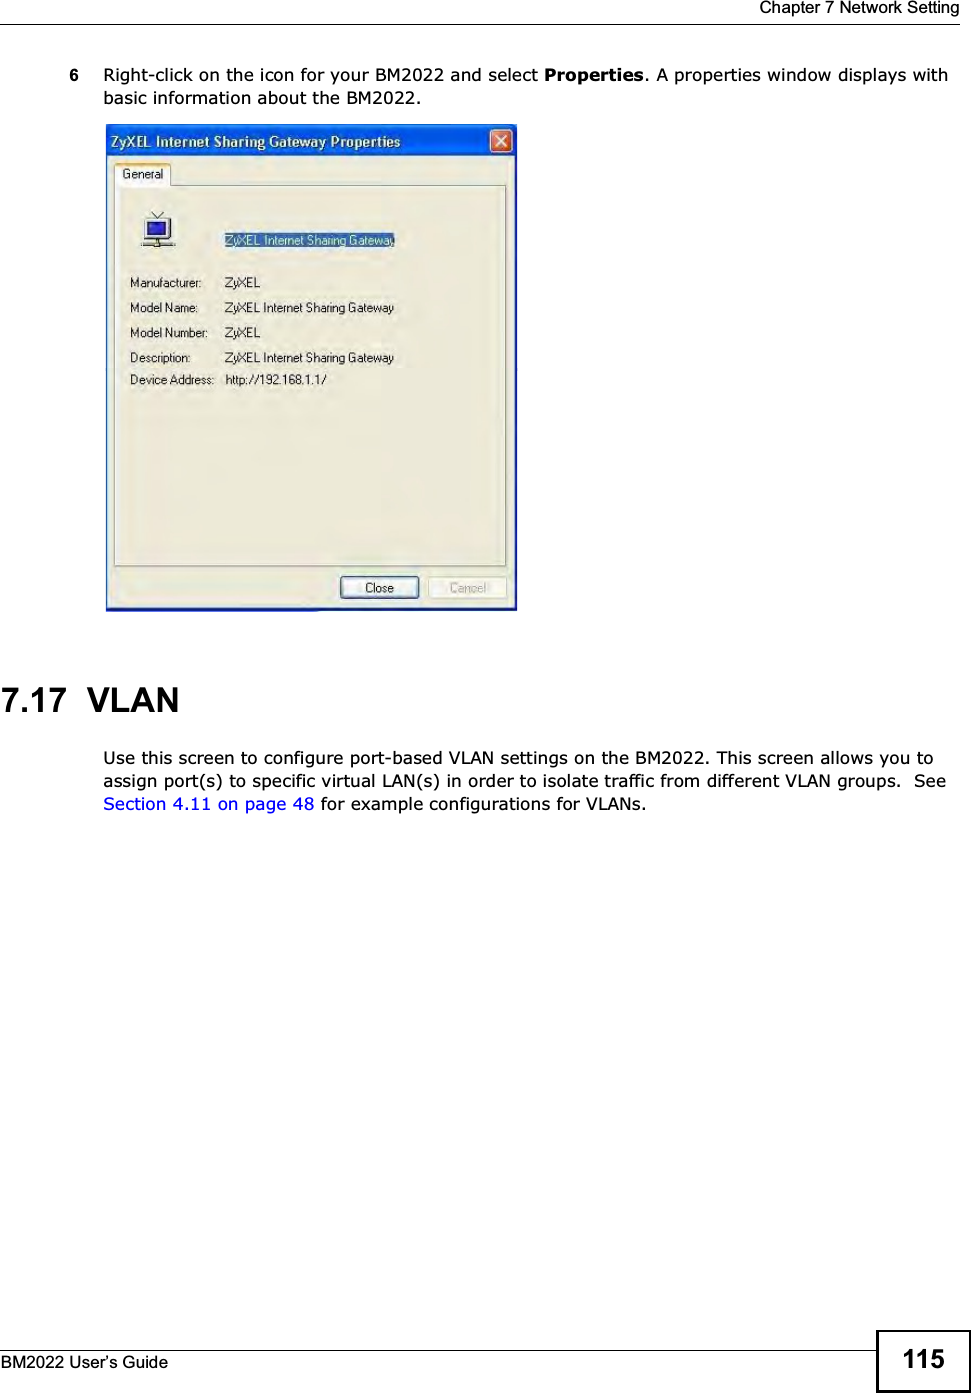  Chapter 7 Network SettingBM2022 Users Guide 1156Right-click on the icon for your BM2022 and select Properties. A properties window displays with basic information about the BM2022. 7.17  VLANUse this screen to configure port-based VLAN settings on the BM2022. This screen allows you to assign port(s) to specific virtual LAN(s) in order to isolate traffic from different VLAN groups.  See Section 4.11 on page 48 for example configurations for VLANs.